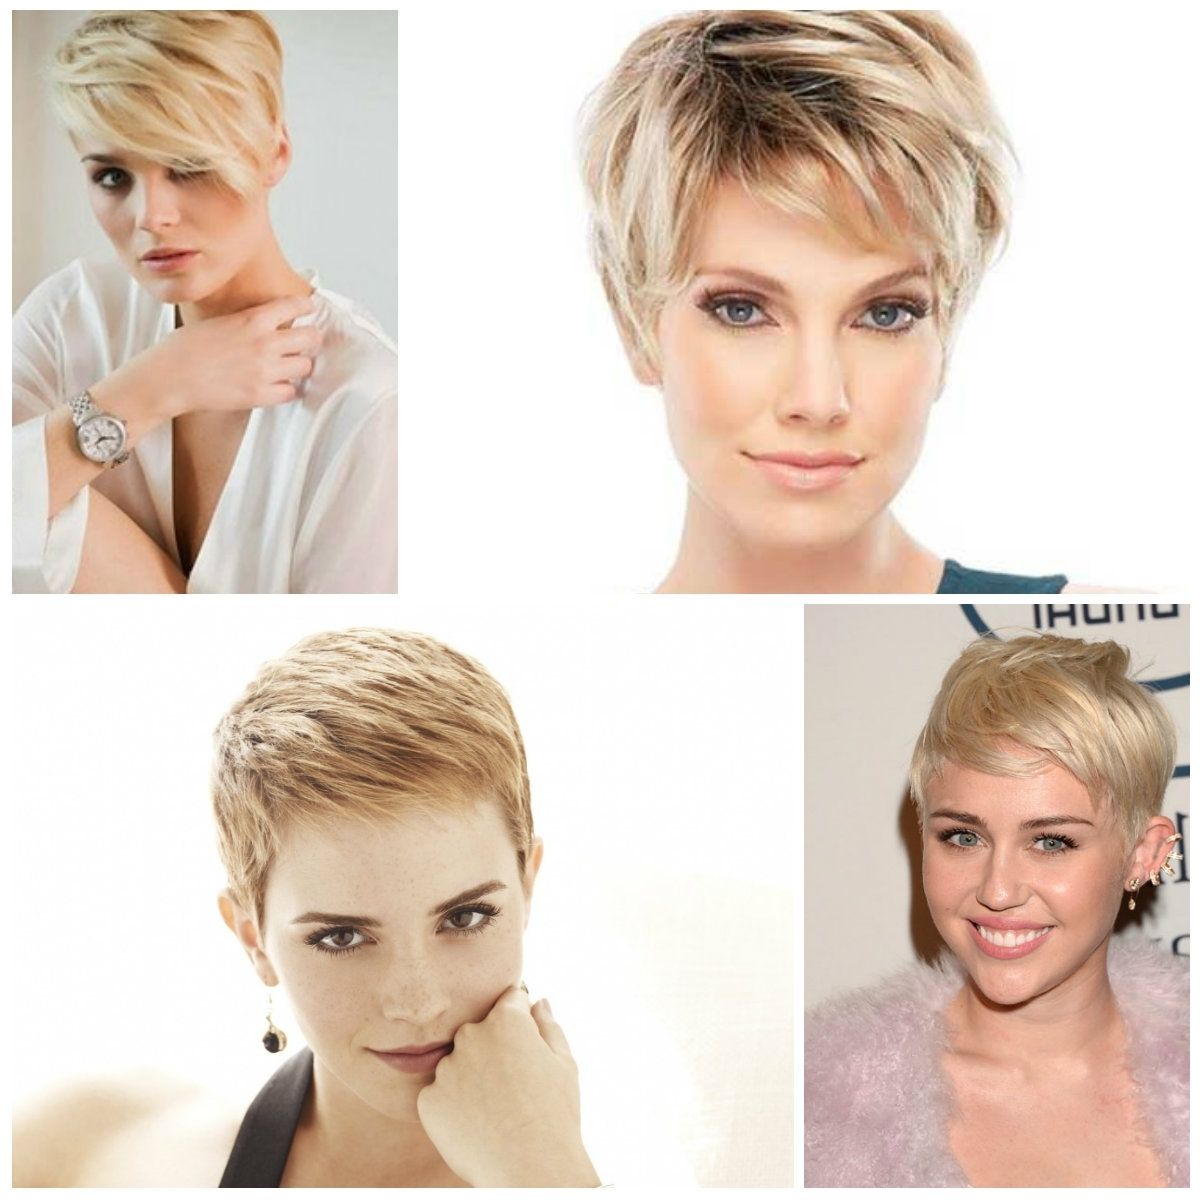 Subtle Blonde Pixie Hairstyles – Haircuts And Hairstyles For 2017 Within Newest Short Bangs Pixie Hairstyles (View 15 of 15)